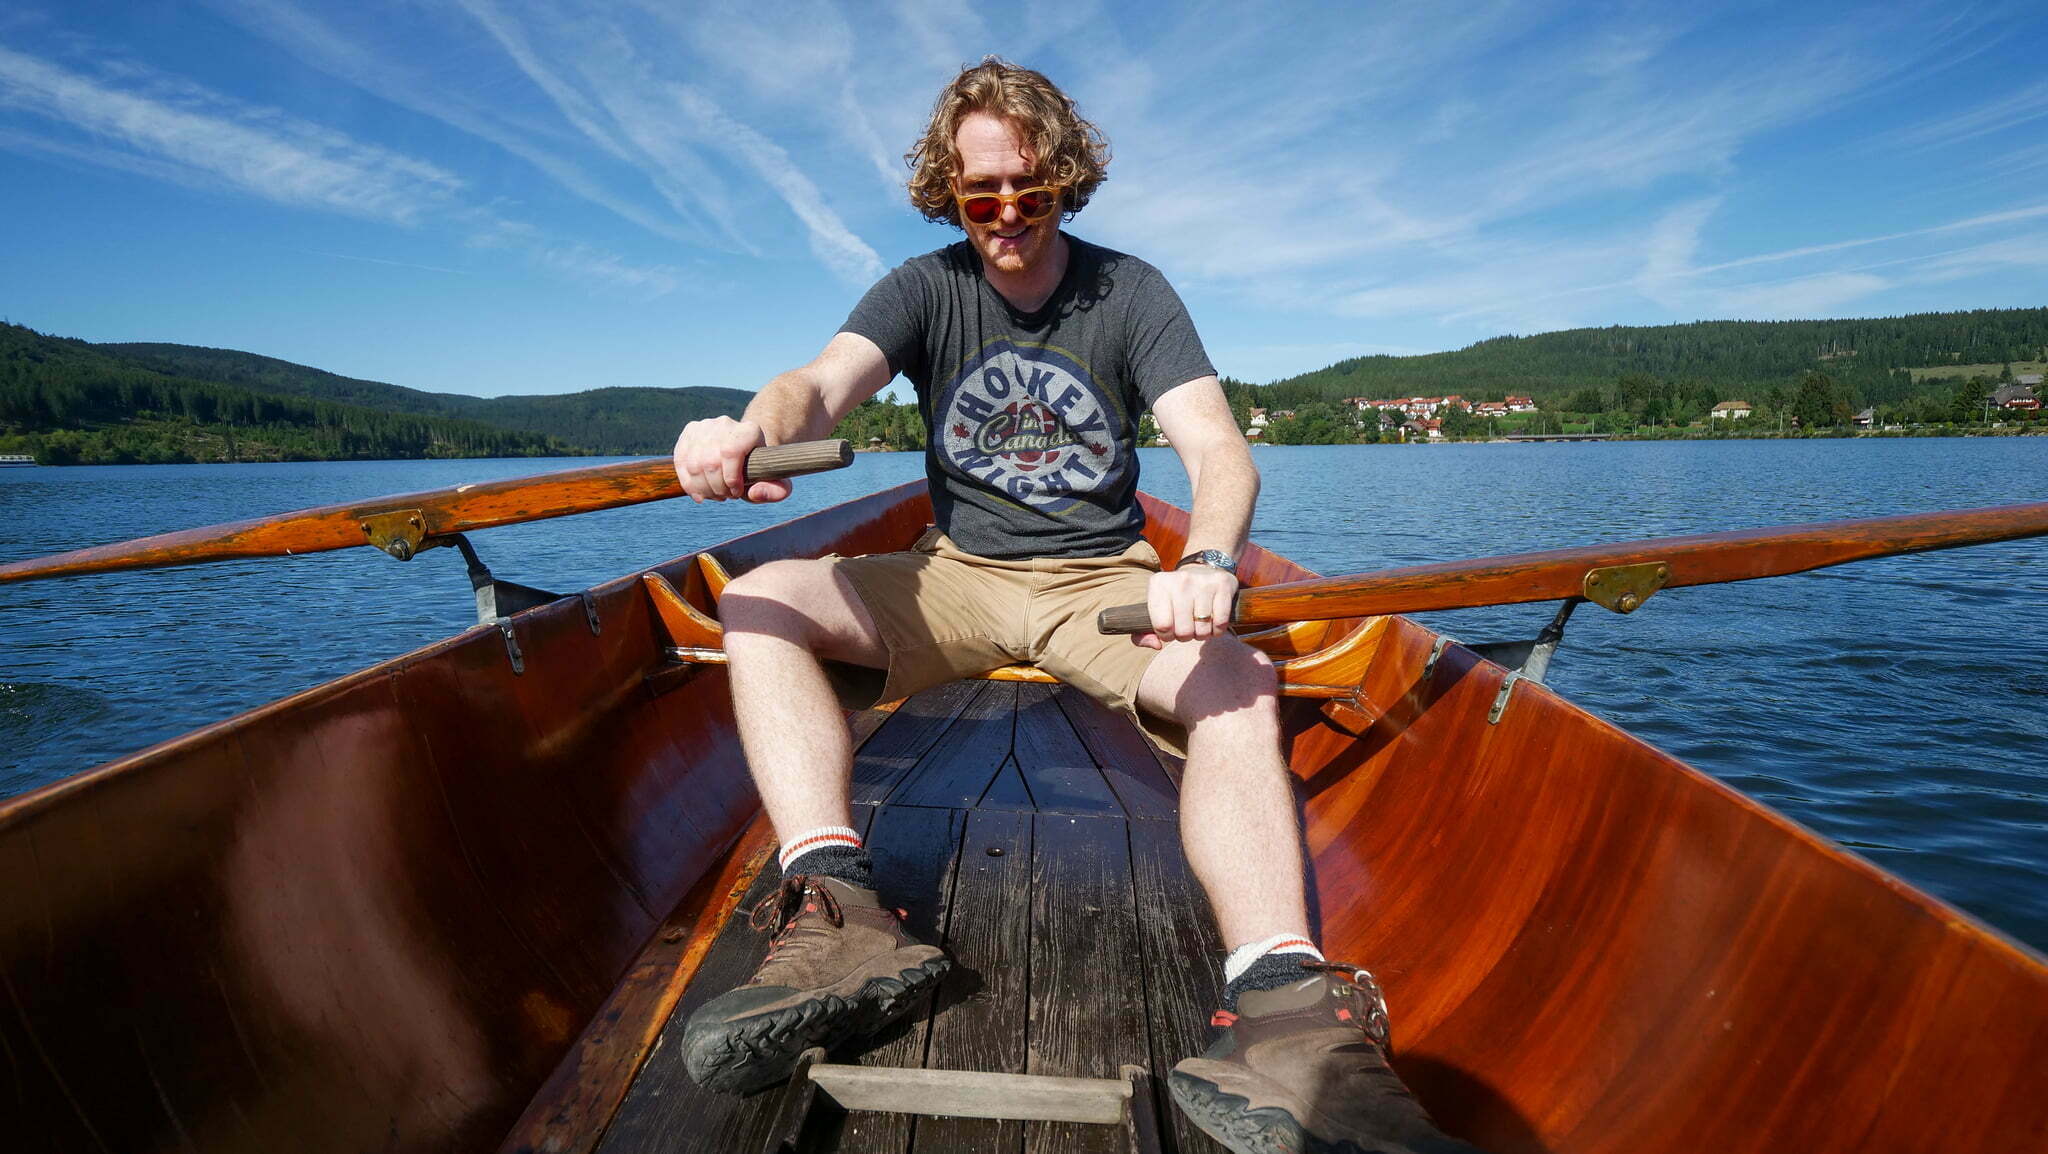 Nomadic Samuel rowing in the Black Forest region of Germany